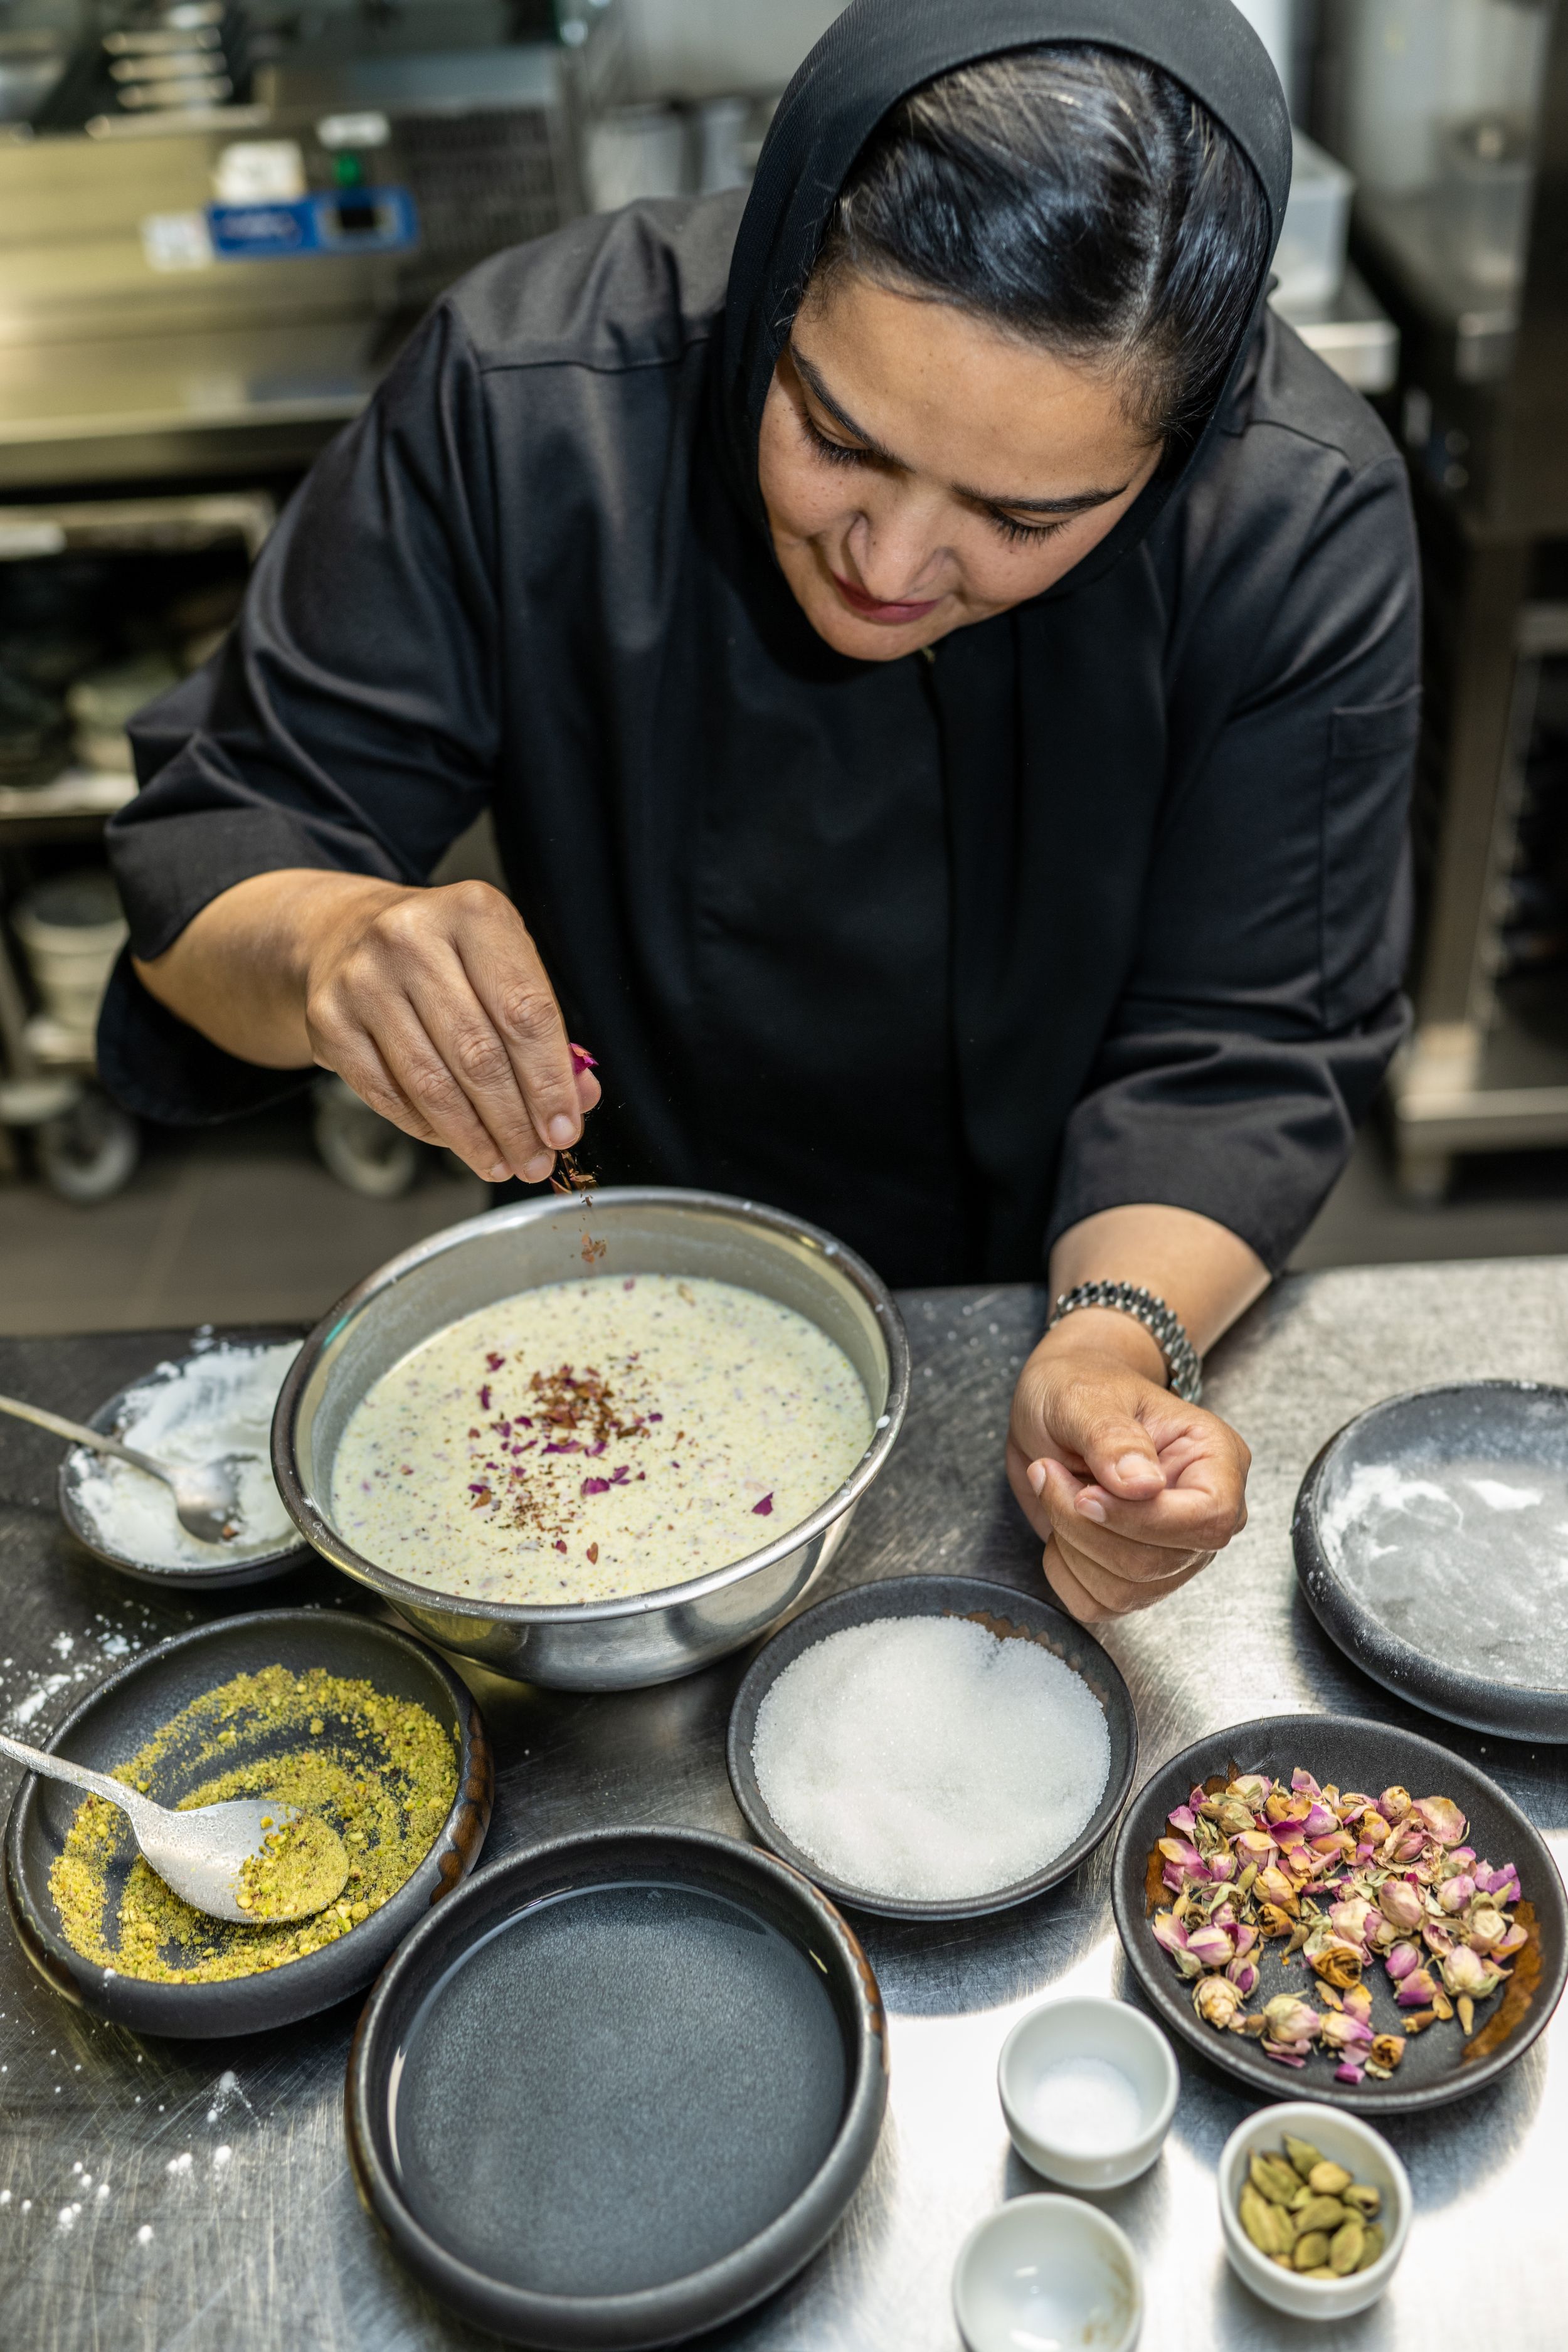 Renowned Qatari Chef Noof adds spices to a bowl, surrounded by ingredients in her professional kitchen.